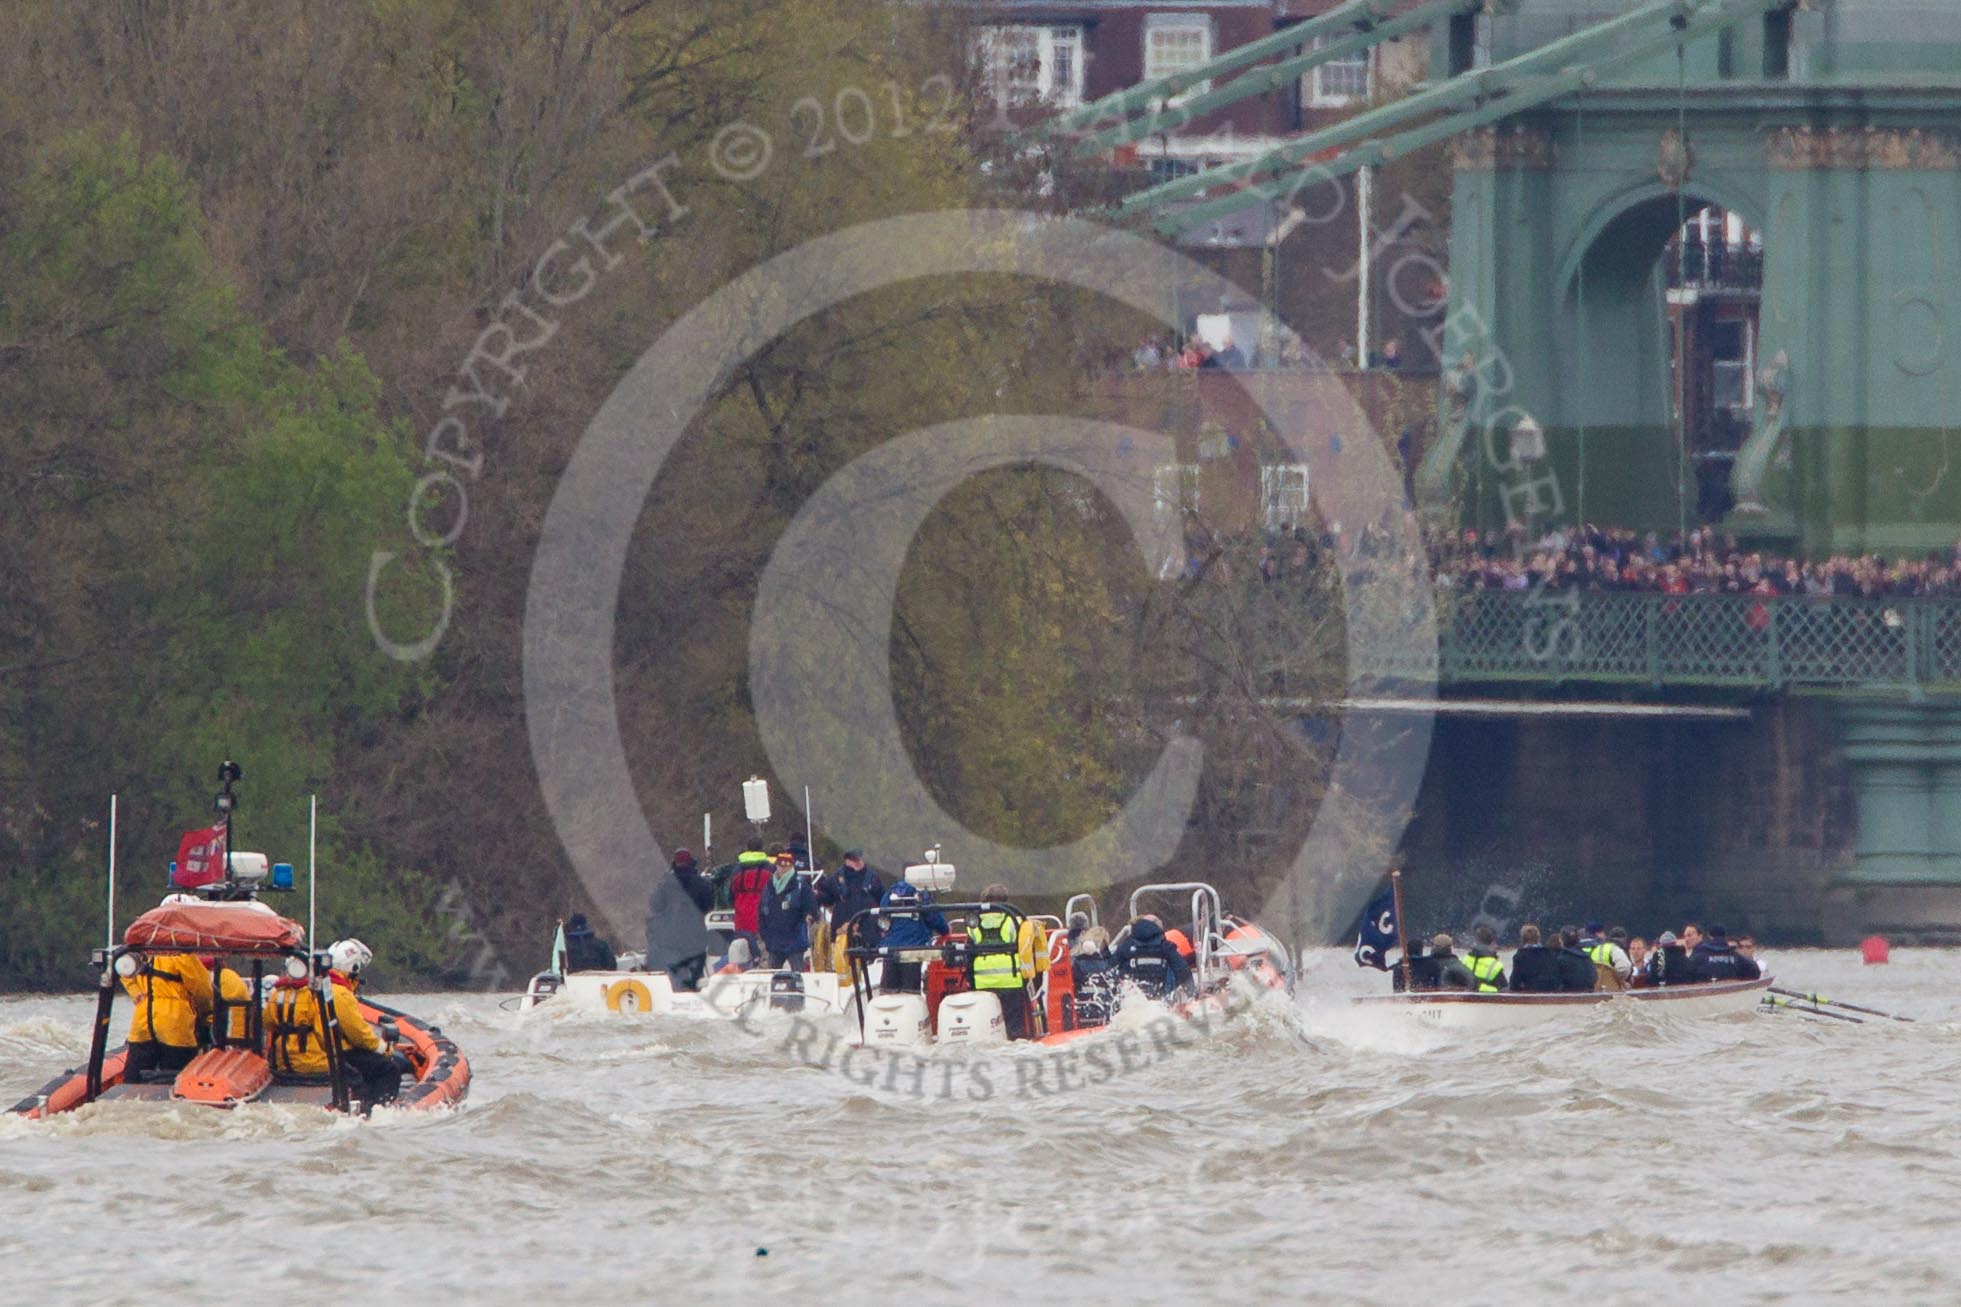 The Boat Race 2012: The 2012 Boat Race, with the boats approaching Hammersmith Bridge: The Cambridge Blue Boat on the left, nearly covered by the boat of the umpire, and the Oxford Blue Boat on the right..




on 07 April 2012 at 14:20, image #297